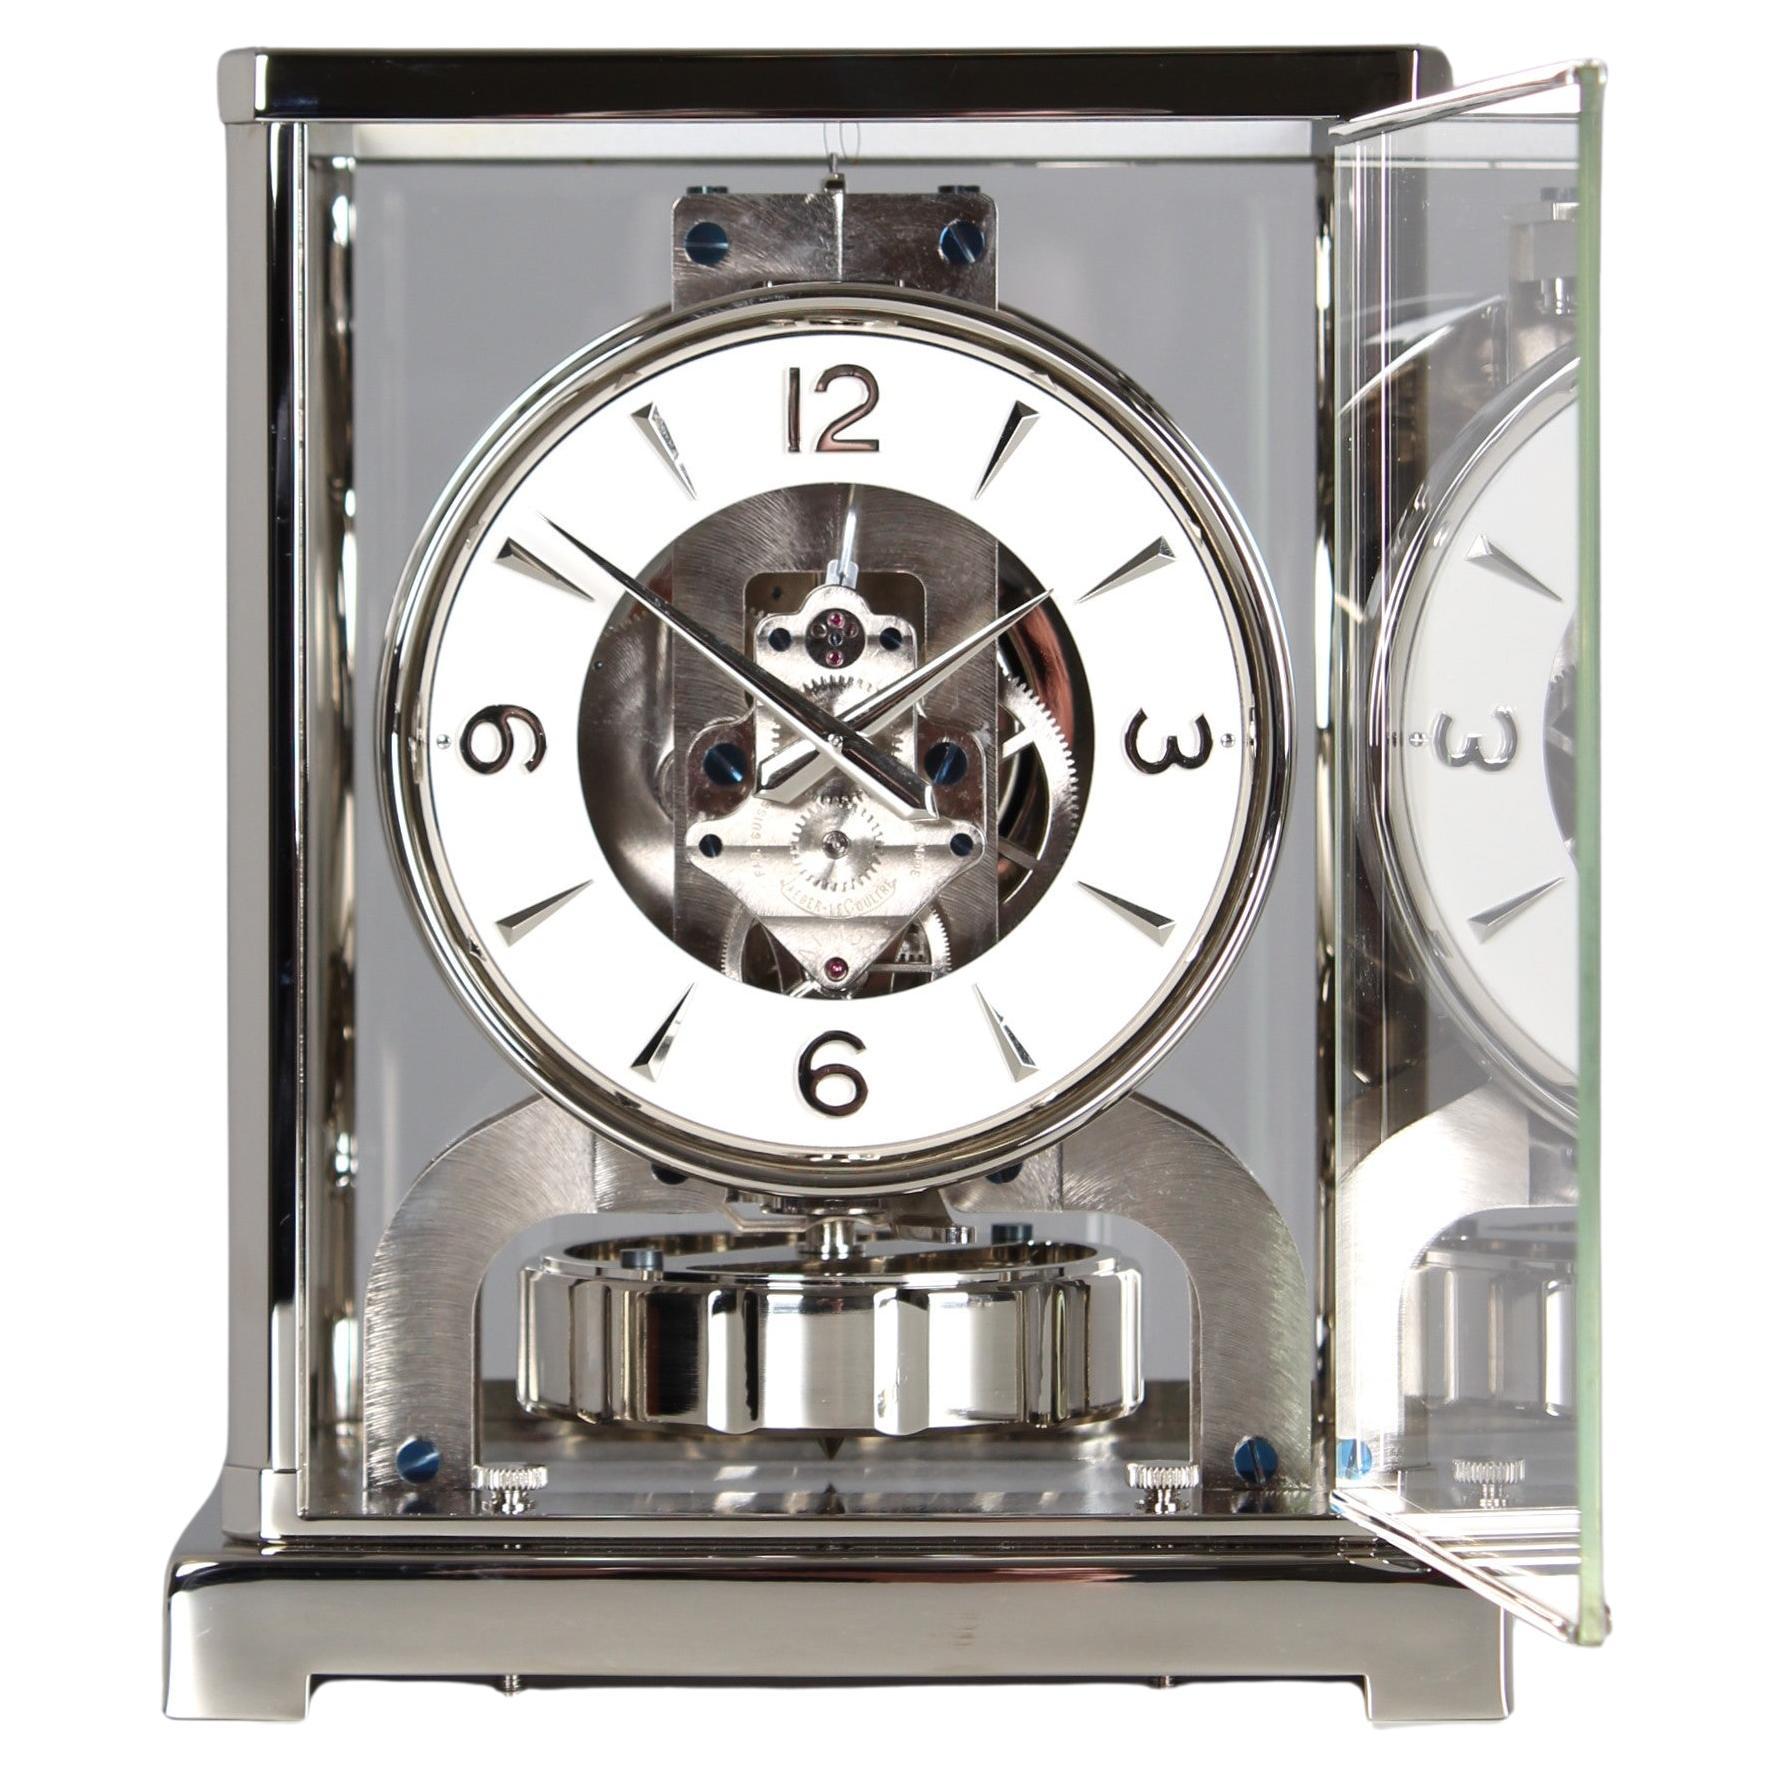 Jaeger LeCoultre, Silver Atmos Clock from 1955, Revised and New Nickel-Plated